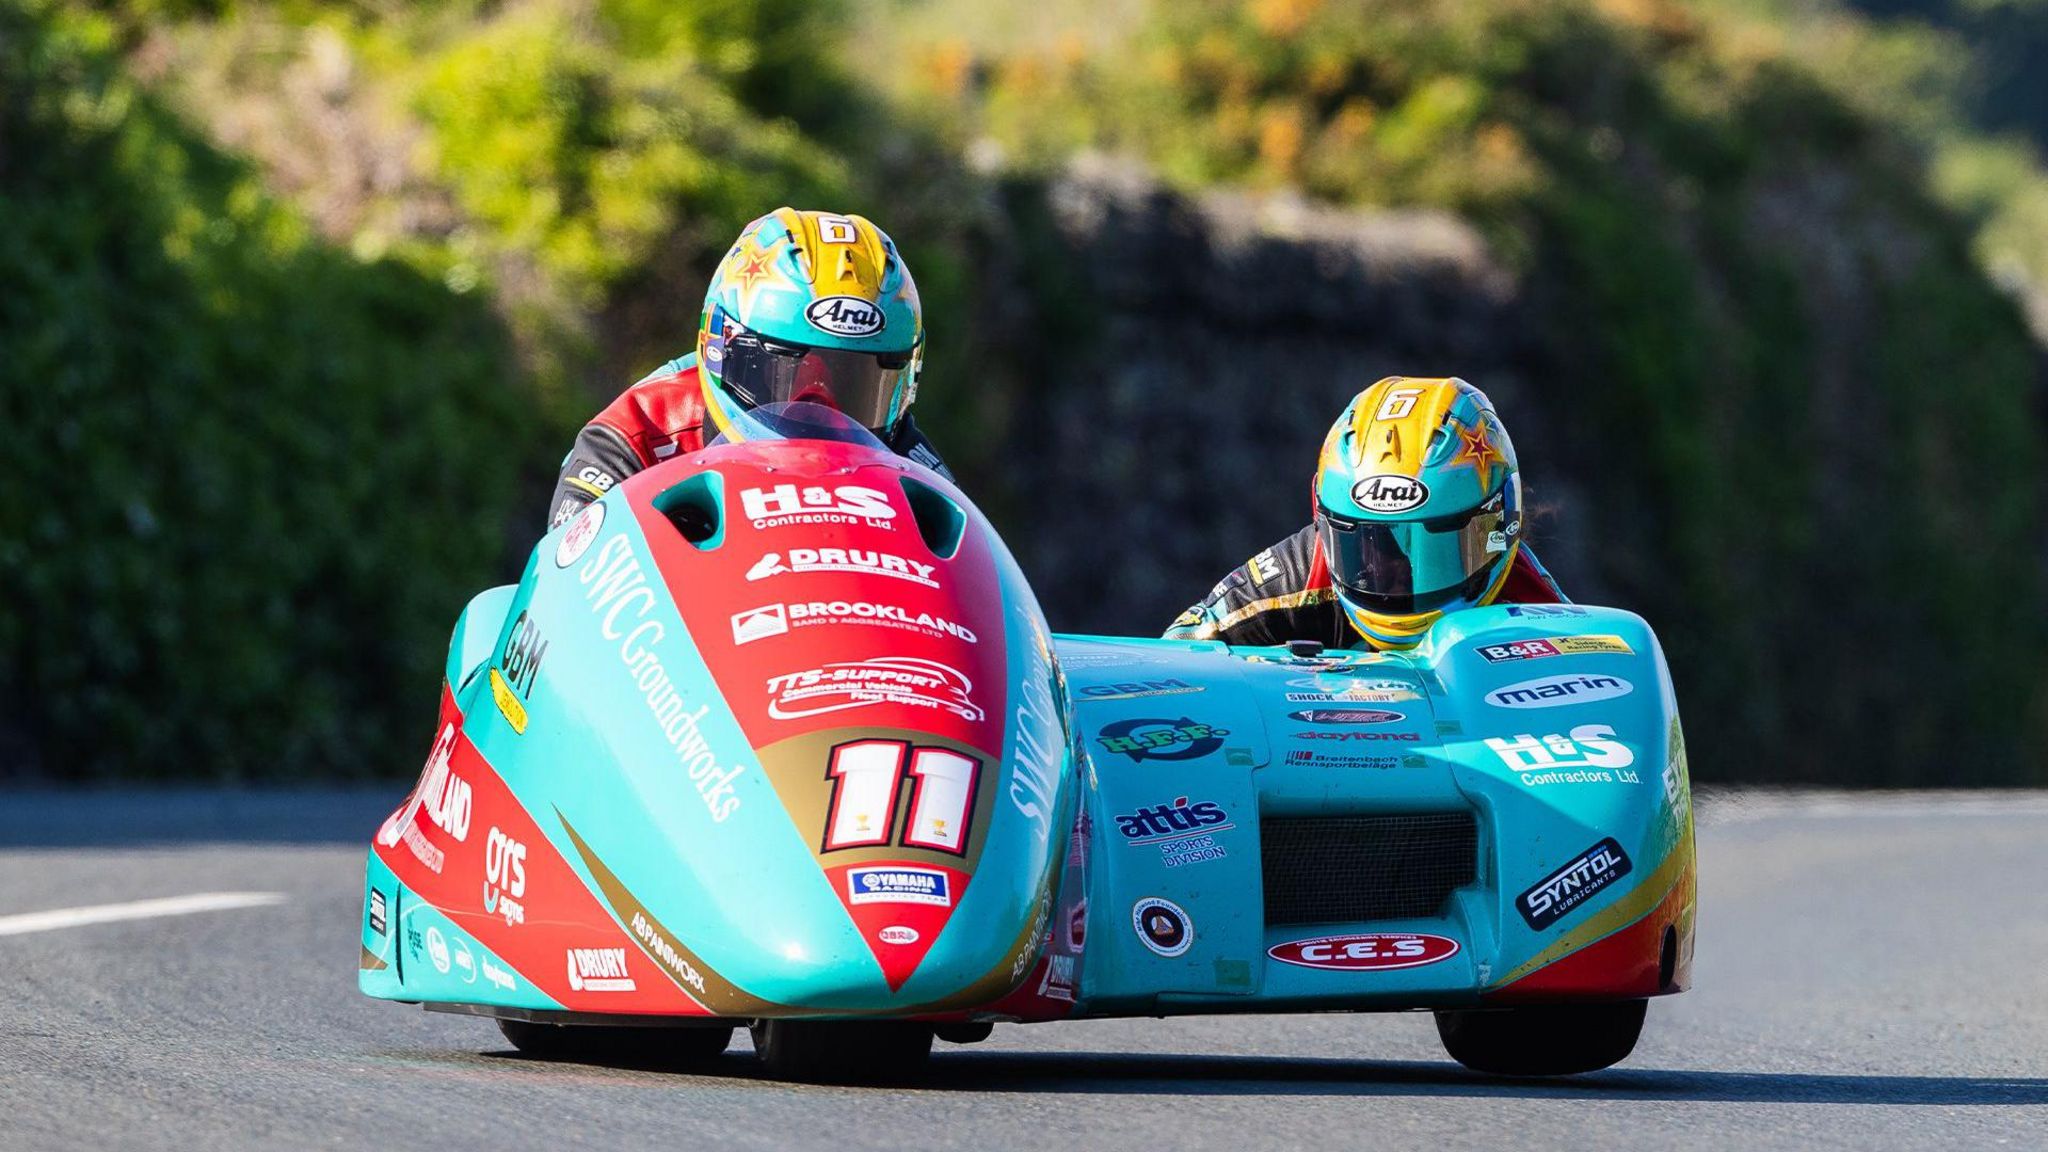 Todd Ellis and Emmanuelle Clement sidecar outfit